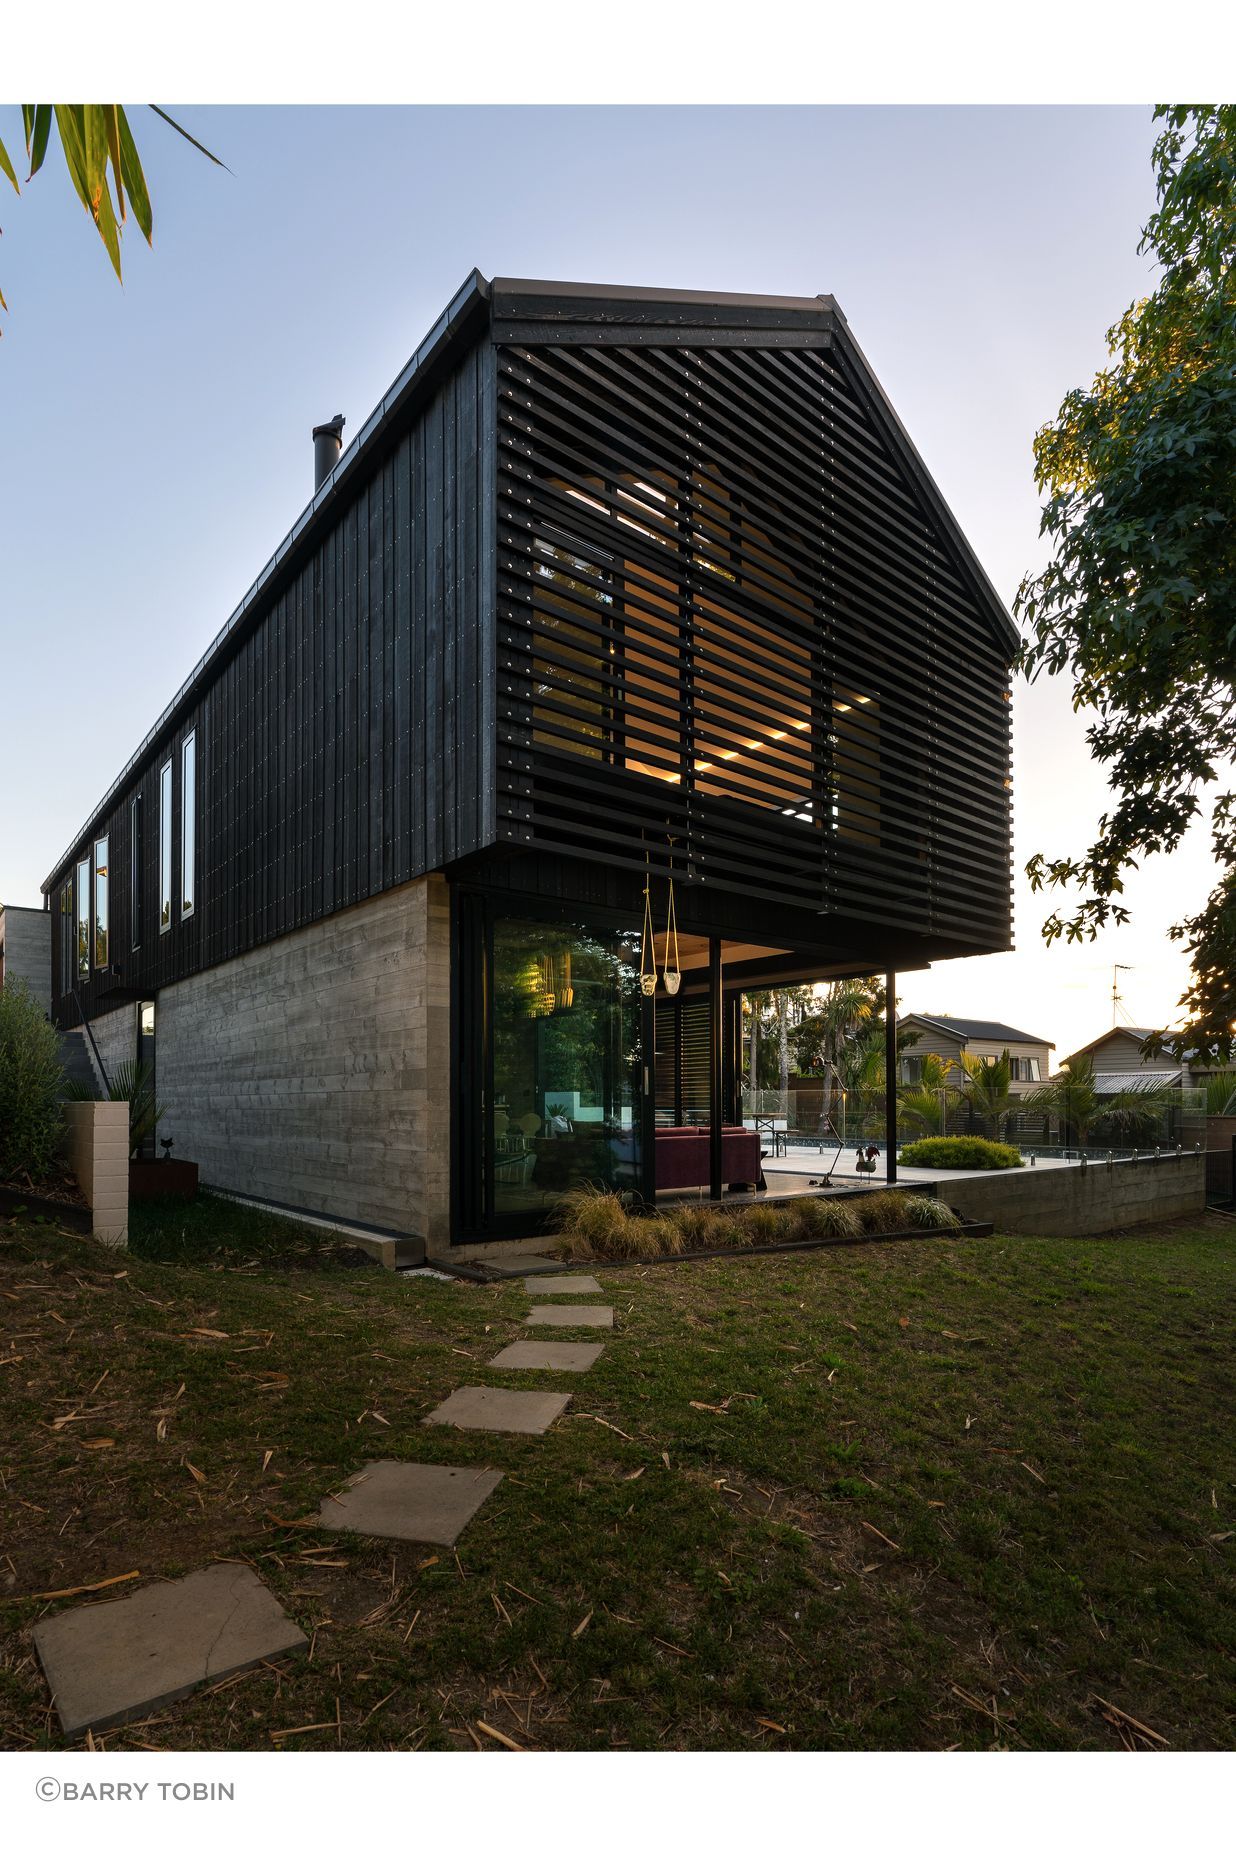 The family home of architect Clive Chapman of Pacific Environments Architects in Auckland. The gable roof, the vertical siding, the small windows and the strength of the concrete and corten steel are all references to the industrial shed feel that Clive wanted.